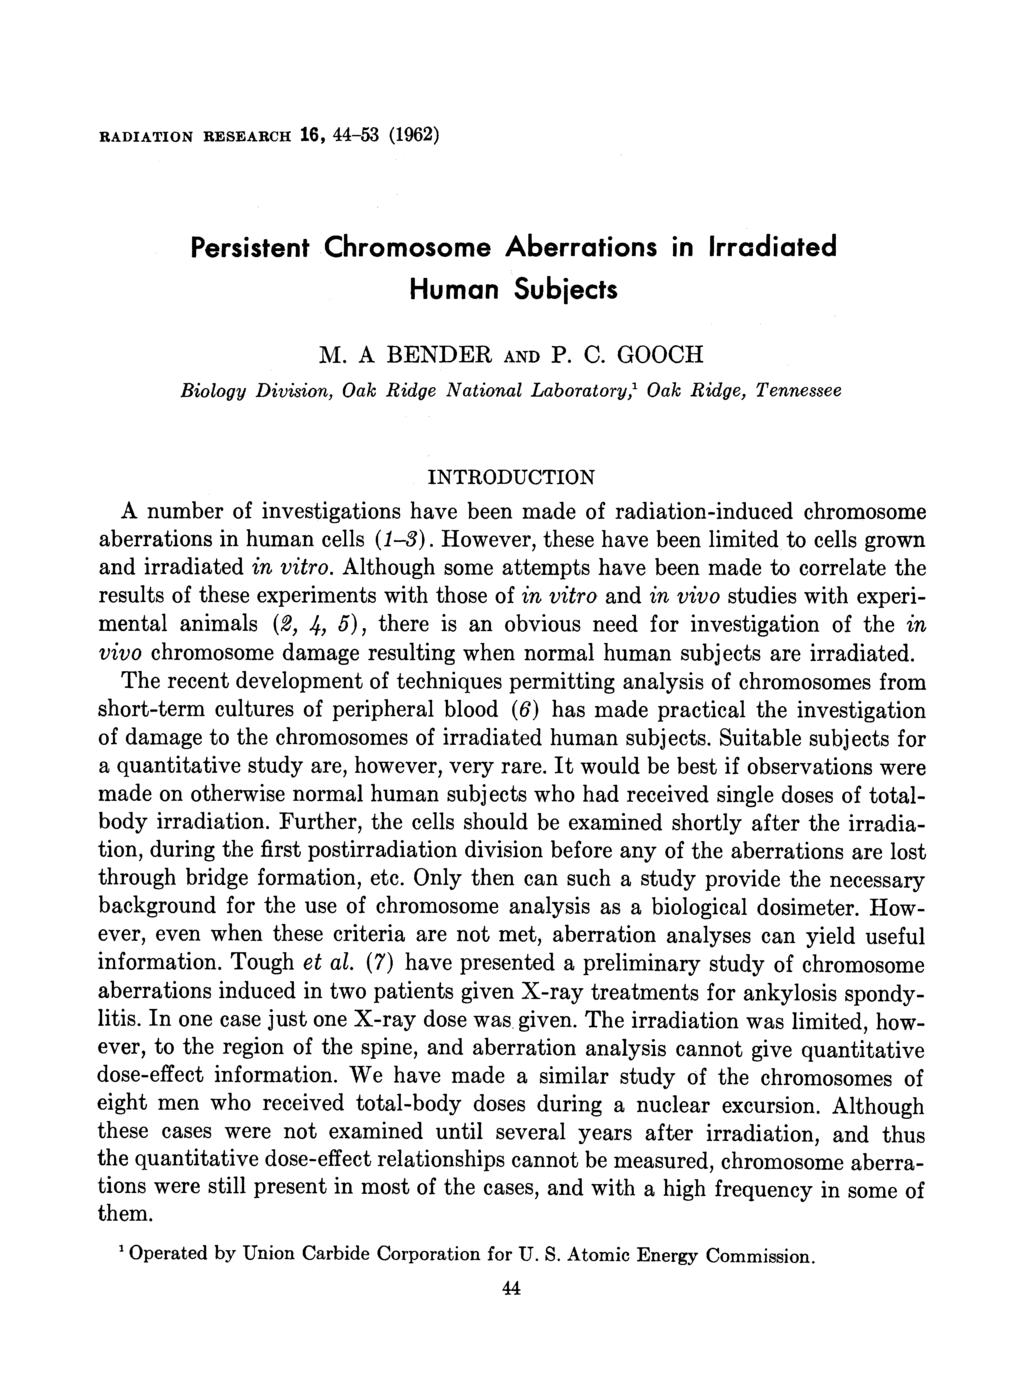 RADIATION RESEARCH 16, 44-53 (1962) Persistent Ch